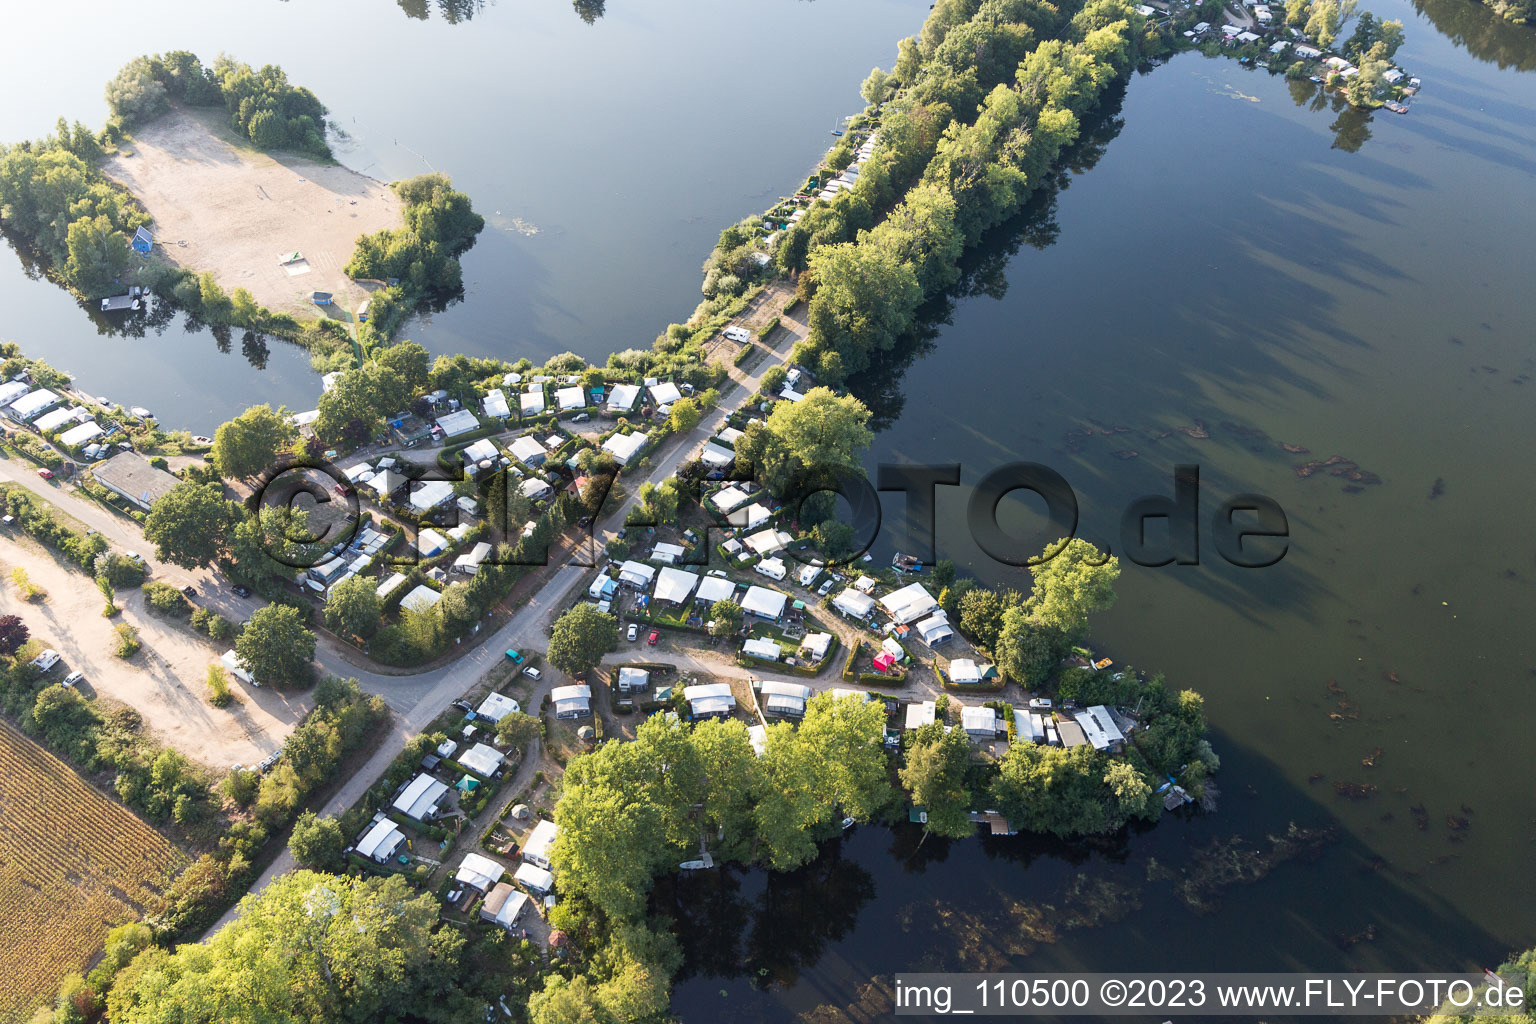 Camping at the Prüßsee in Güster in the state Schleswig Holstein, Germany seen from above